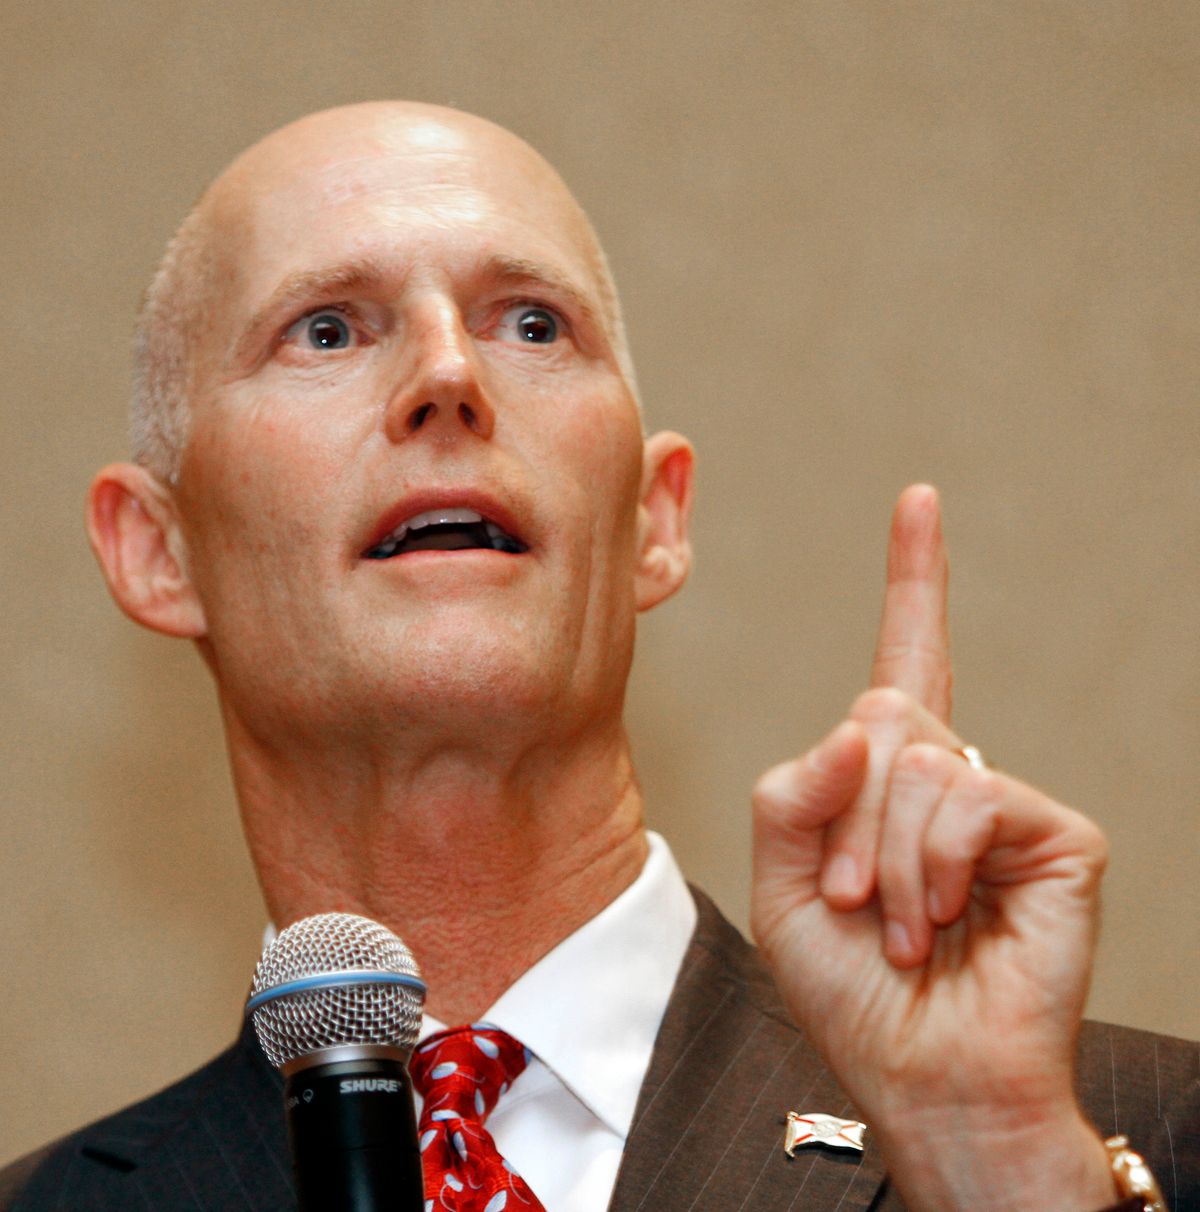 Gov. Rick Scott gestures during a  business conference in Hollywood, Fla., Friday, Feb. 4, 2011. (AP Photo/Alan Diaz)             